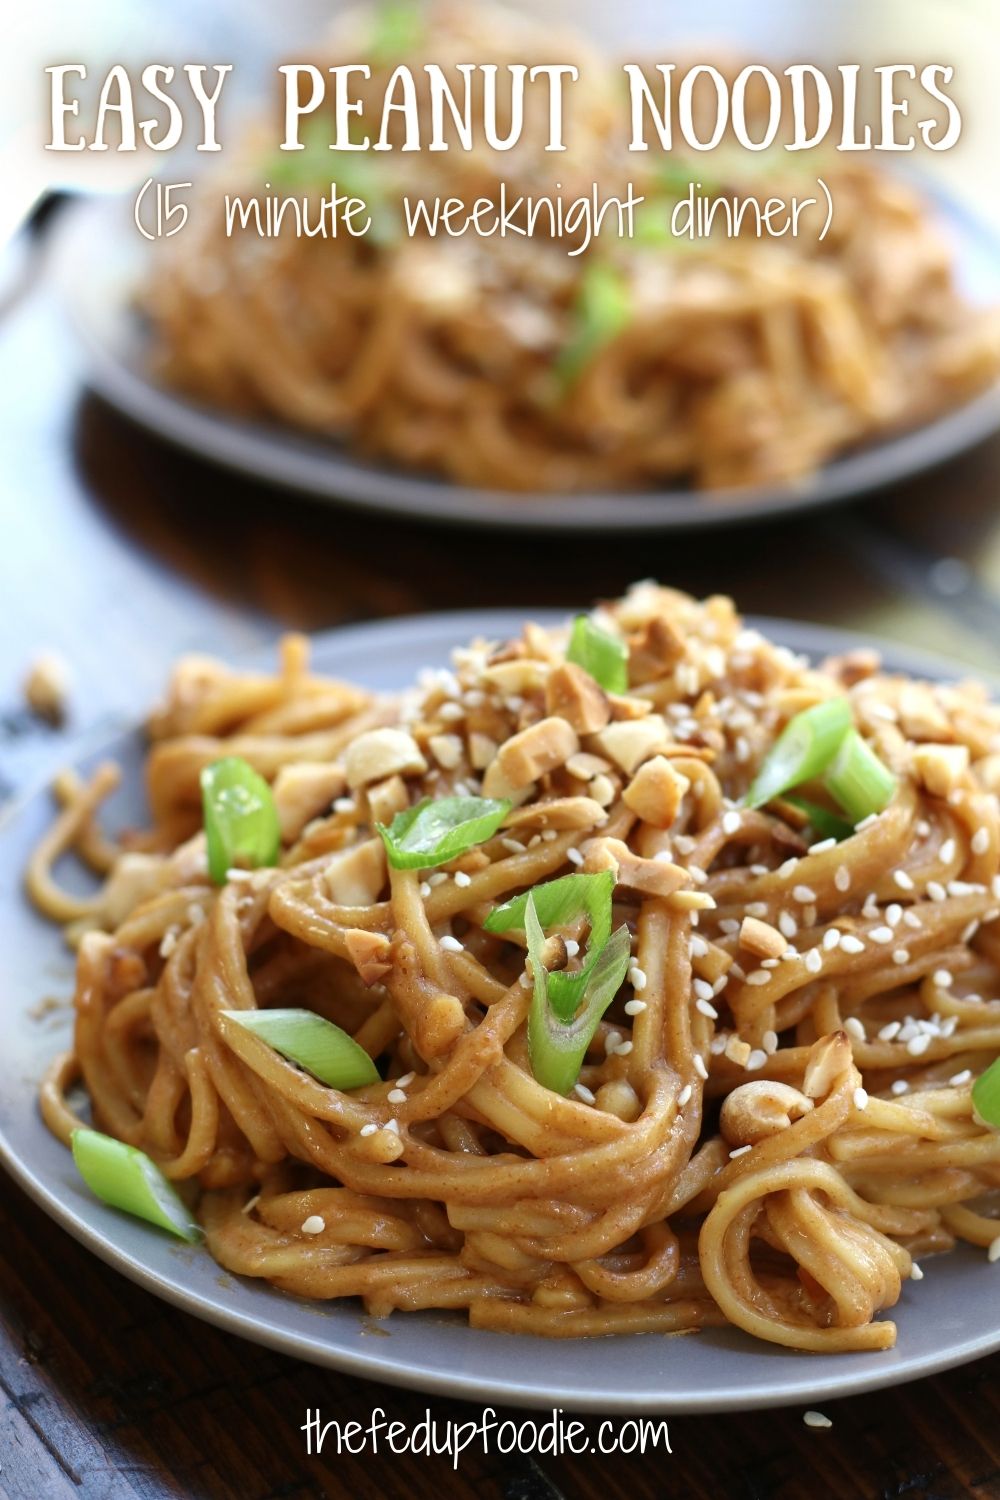 Easy Peanut Noodles is a quick and comforting meal perfect for busy weeknights. This Thai inspired dinner has simple ingredients and can be adjusted easily with spice levels and various add ons. Leftovers make a delicious packed work lunch. 
#PeanutNoodles #PeanutNoodlesRecipe #PeanutButterNoodles #PeanutButterRecipesDinner #AsianPeanutNoodles 